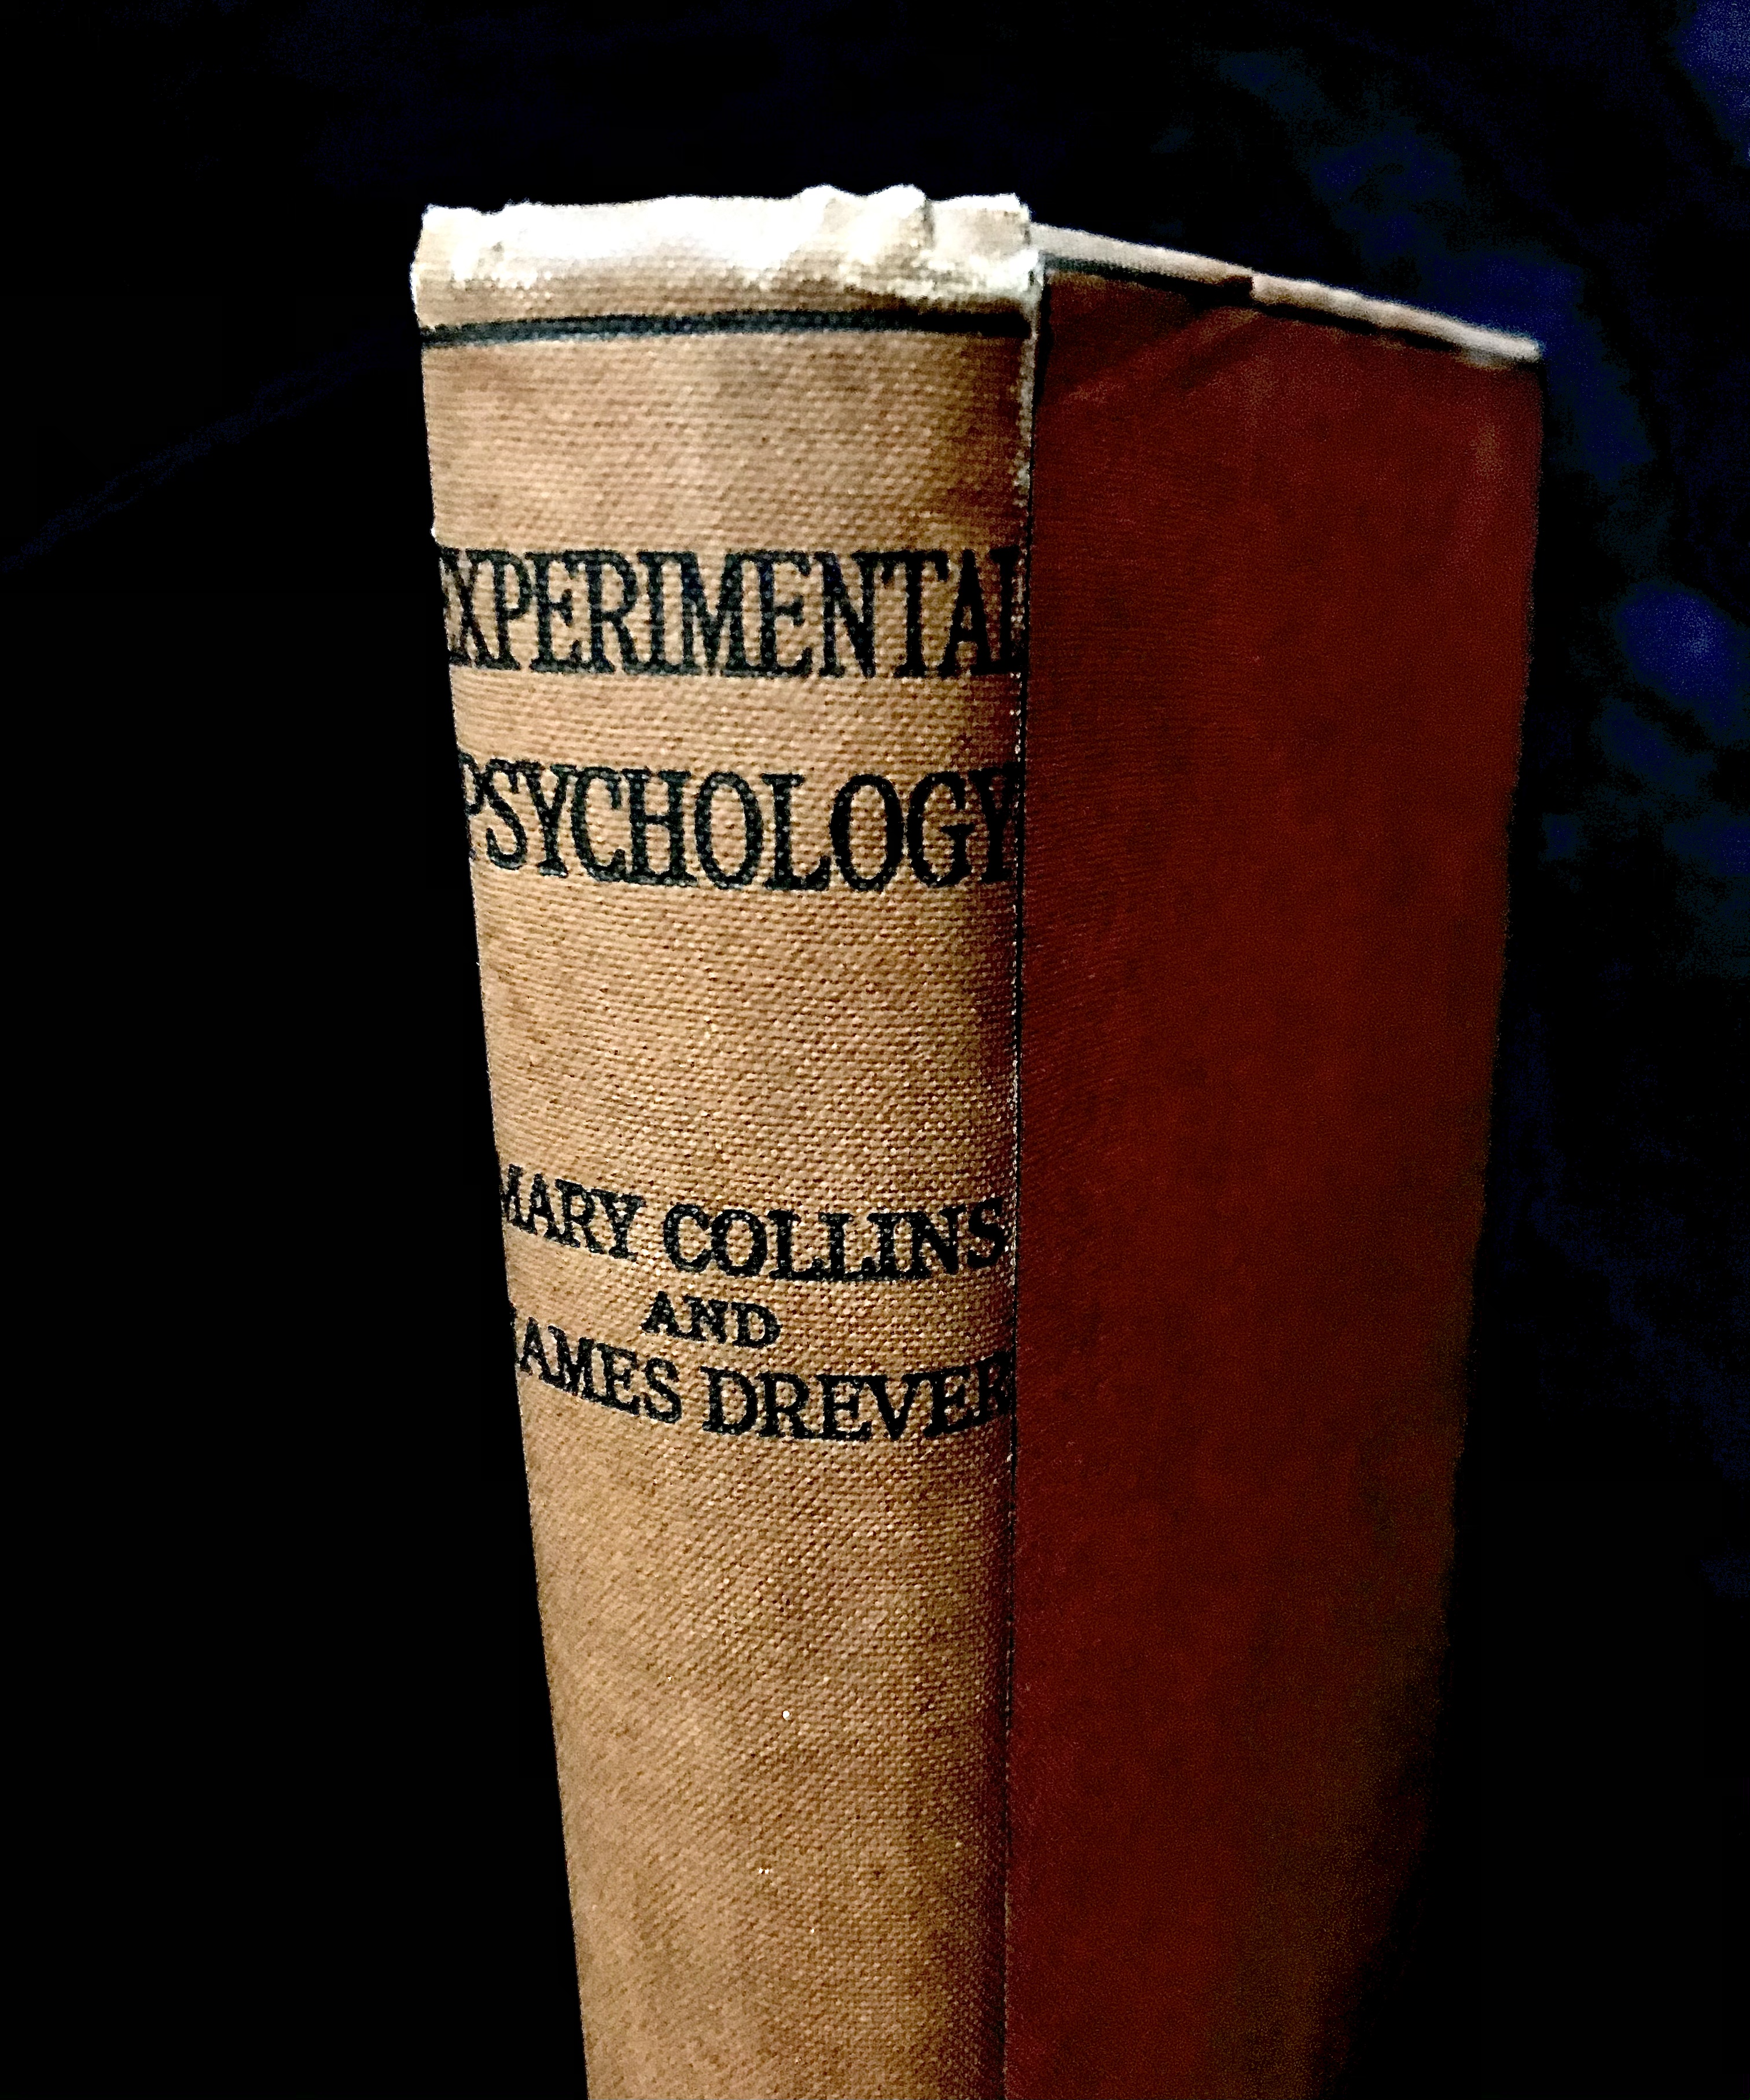 Experimental Psychology by Mary Collins & James Drever